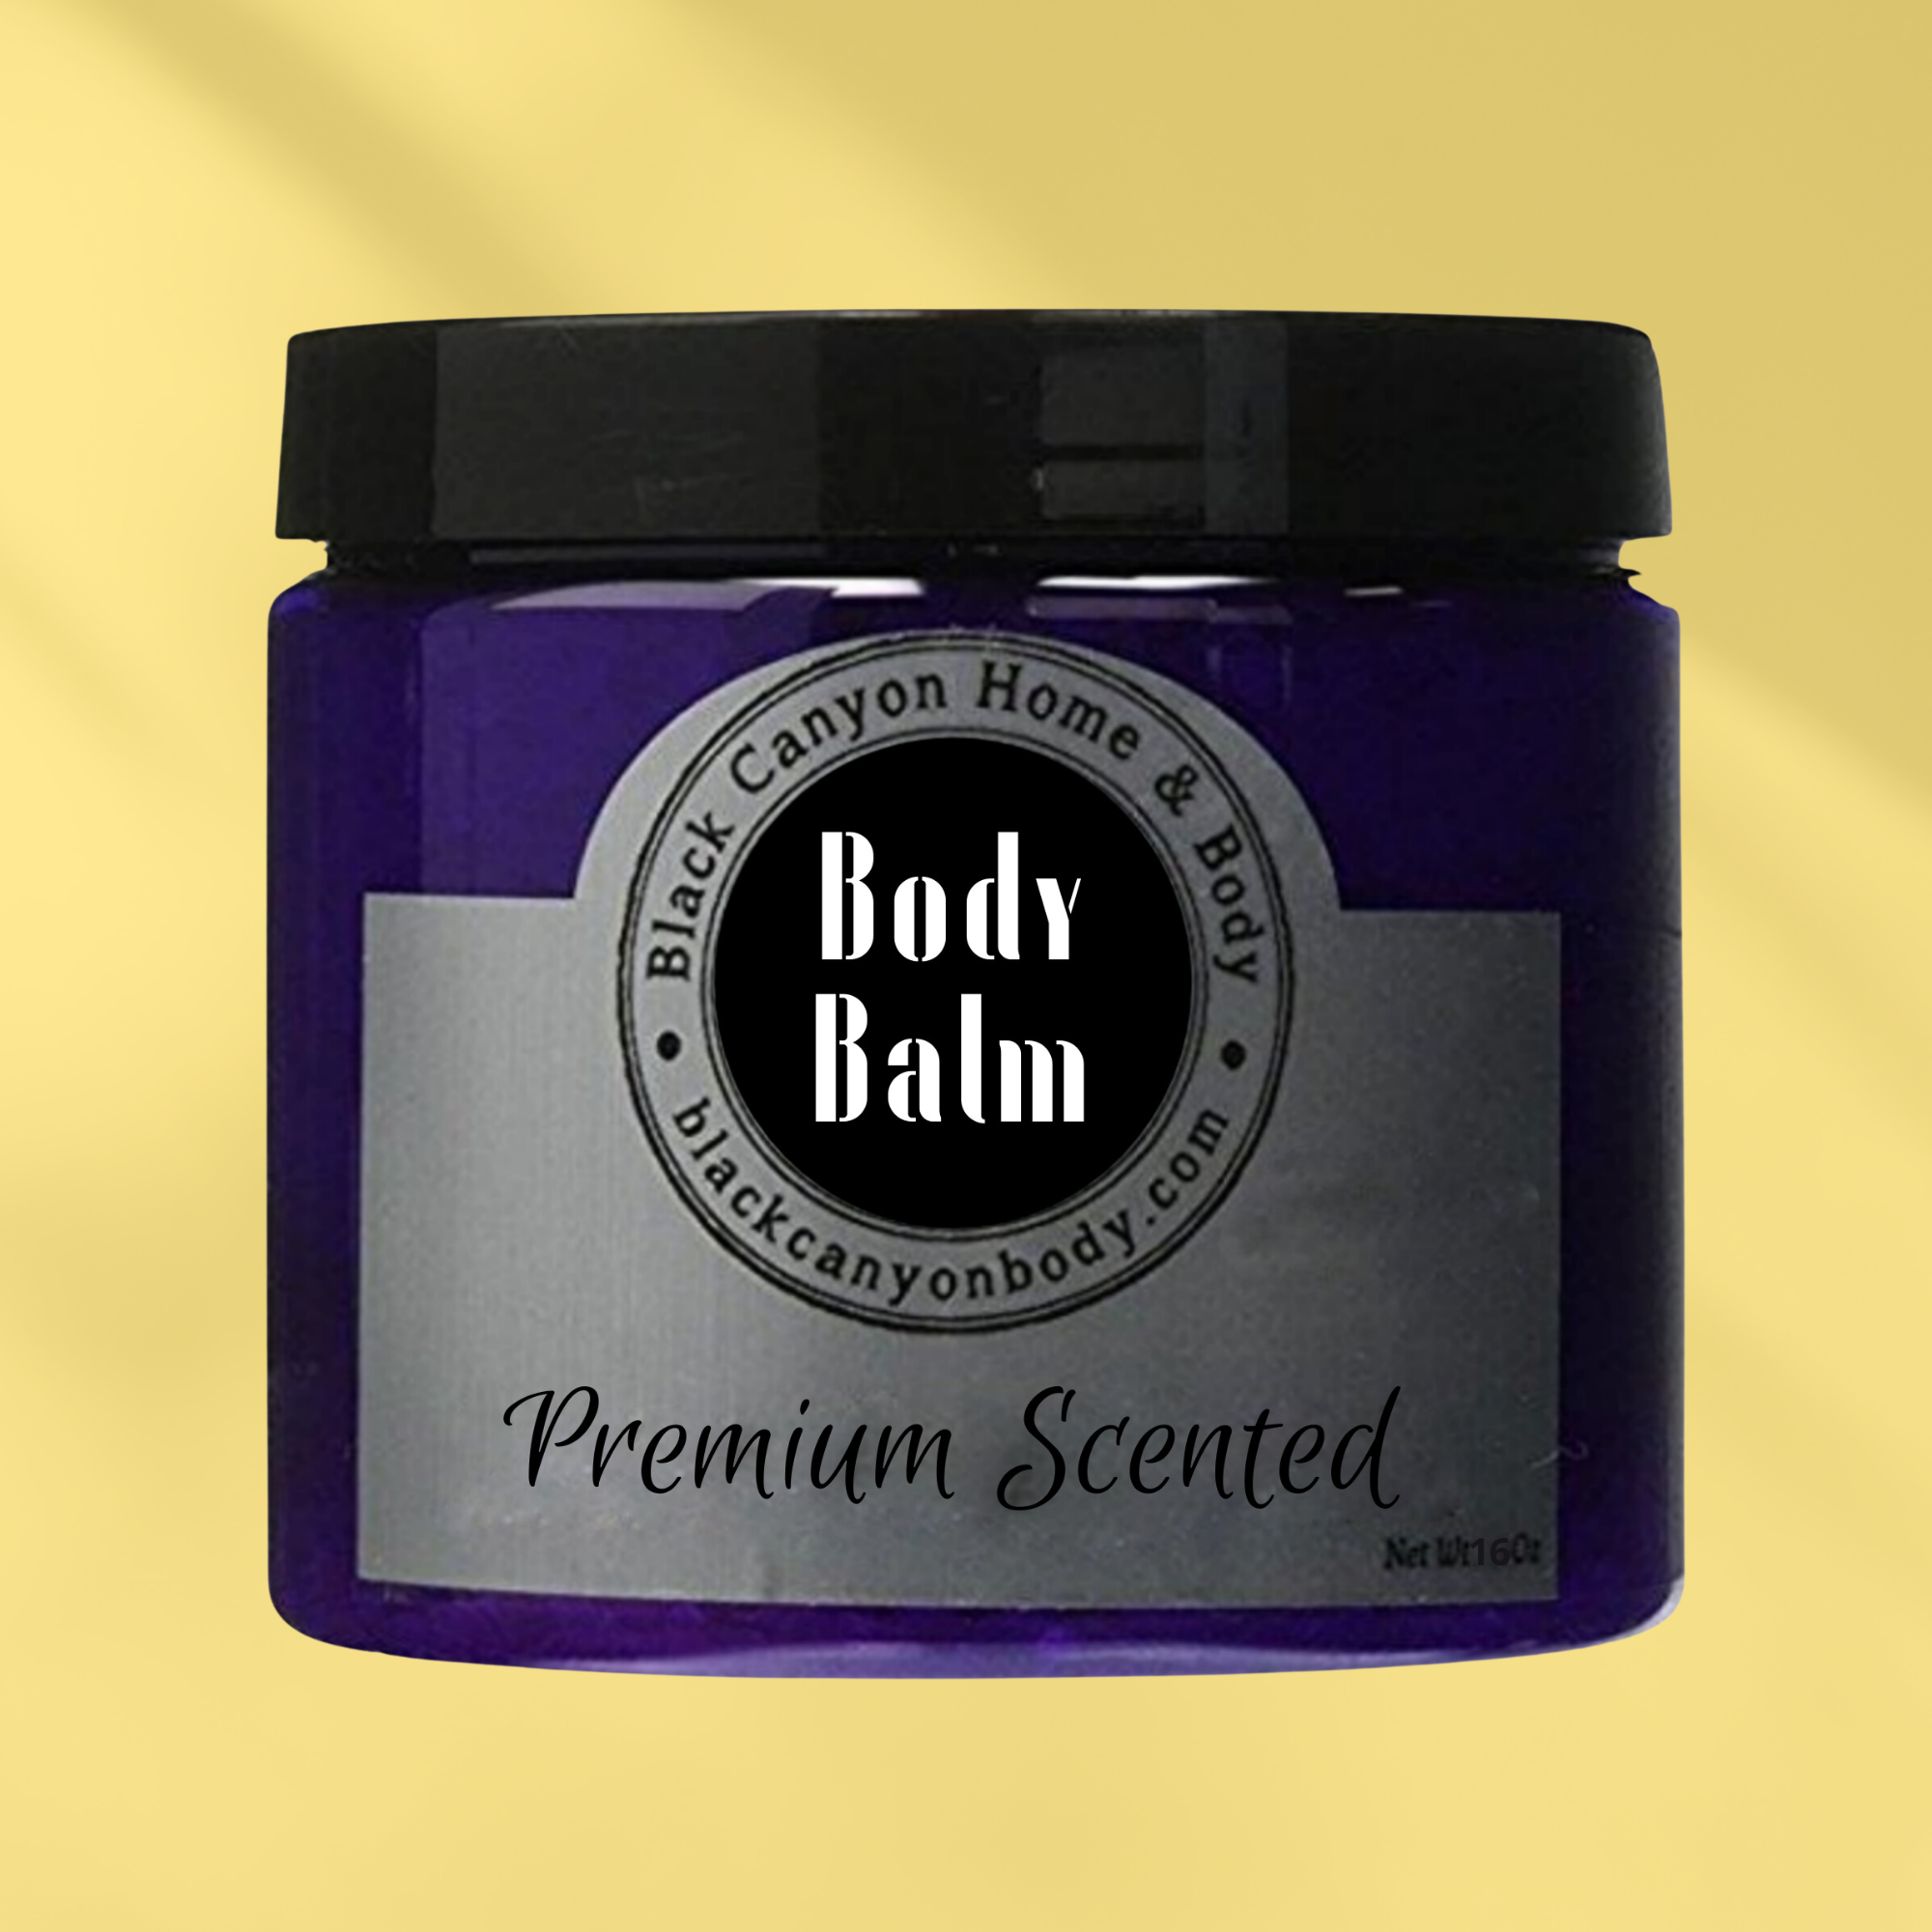 Black Canyon Strawberry Seduction Scented Natural Body Balm with Shea